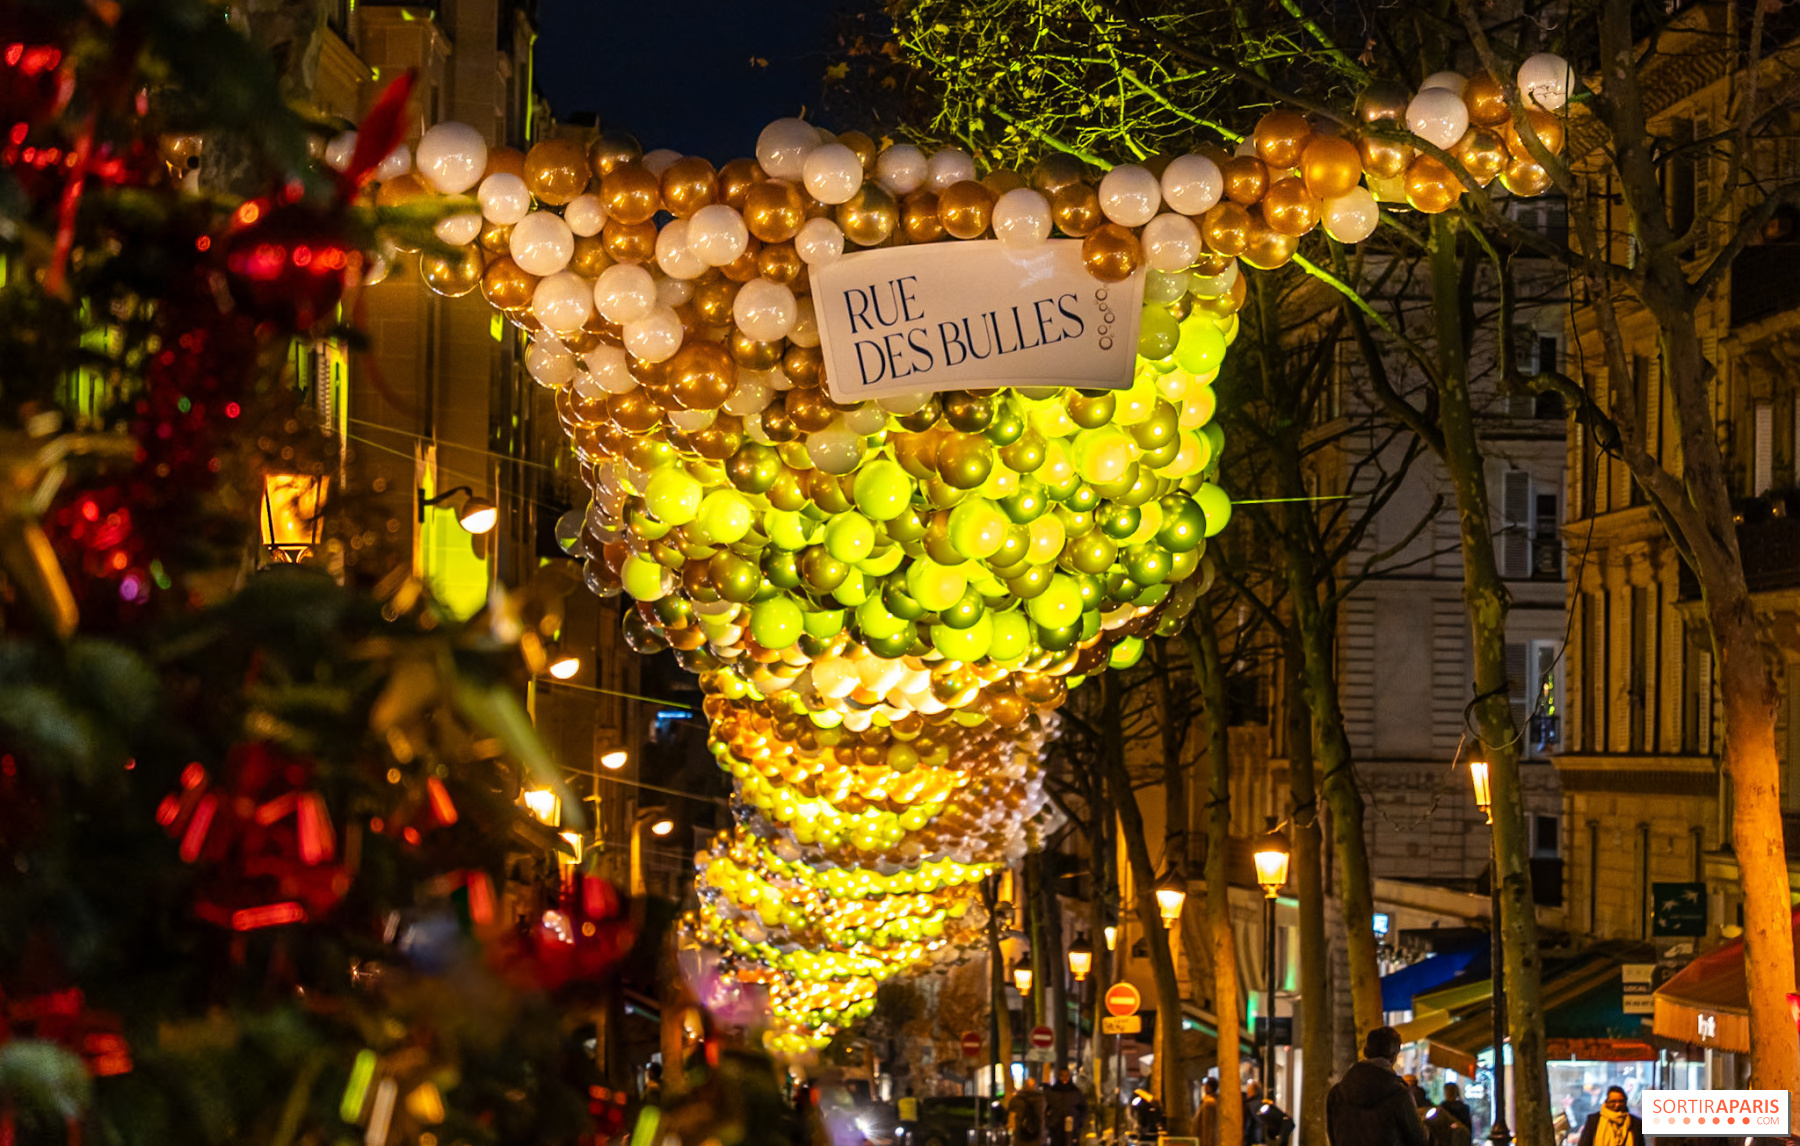 Rue des Bulles 2023 unveiled, magical illumination of the rue des Martyrs 